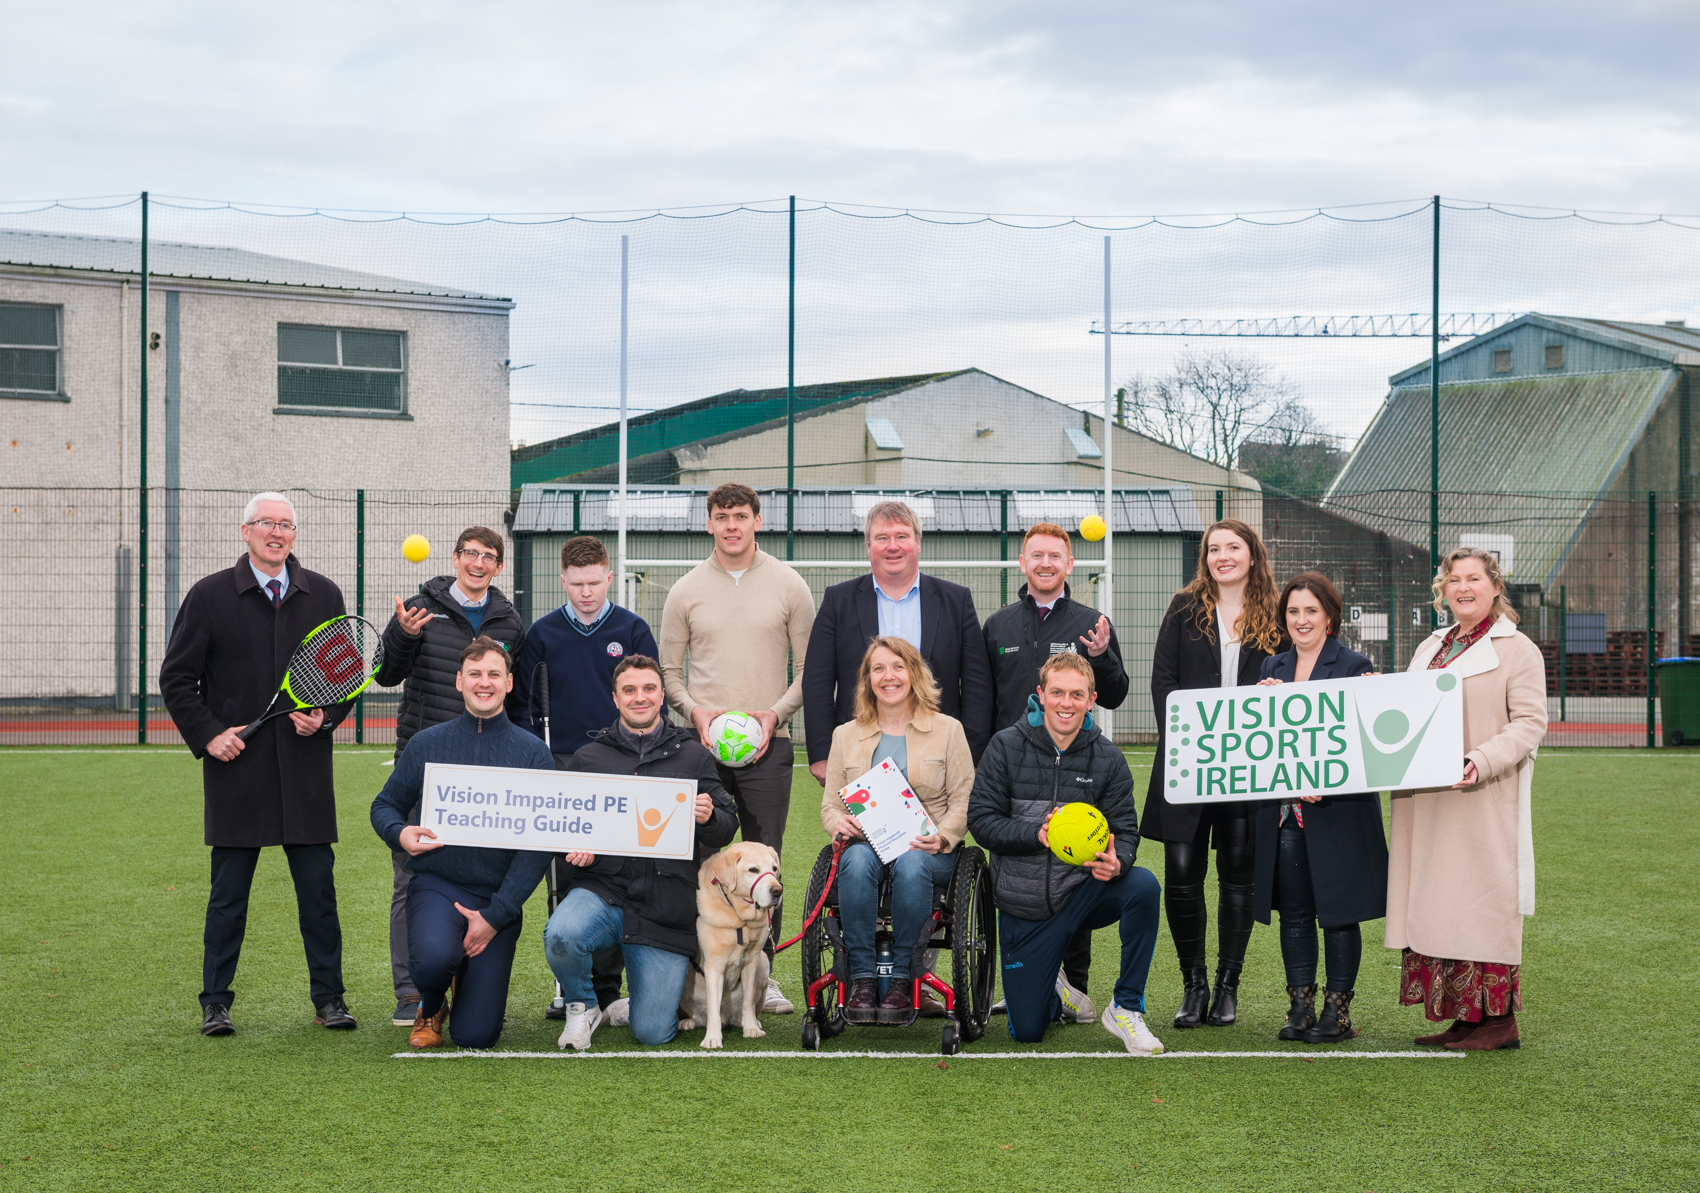 A group photo of from the Vision Impaired PE Teaching Guide launch. The group consists of Senator Martin Conway, Kerry footballer David Clifford, student Michael O Brien and representatives from Vision Sports Ireland, Kerry Local Sports Partnership, St Brendan’s College and the Steering Group which created the resource. The group are holding signs and sporting equipment.